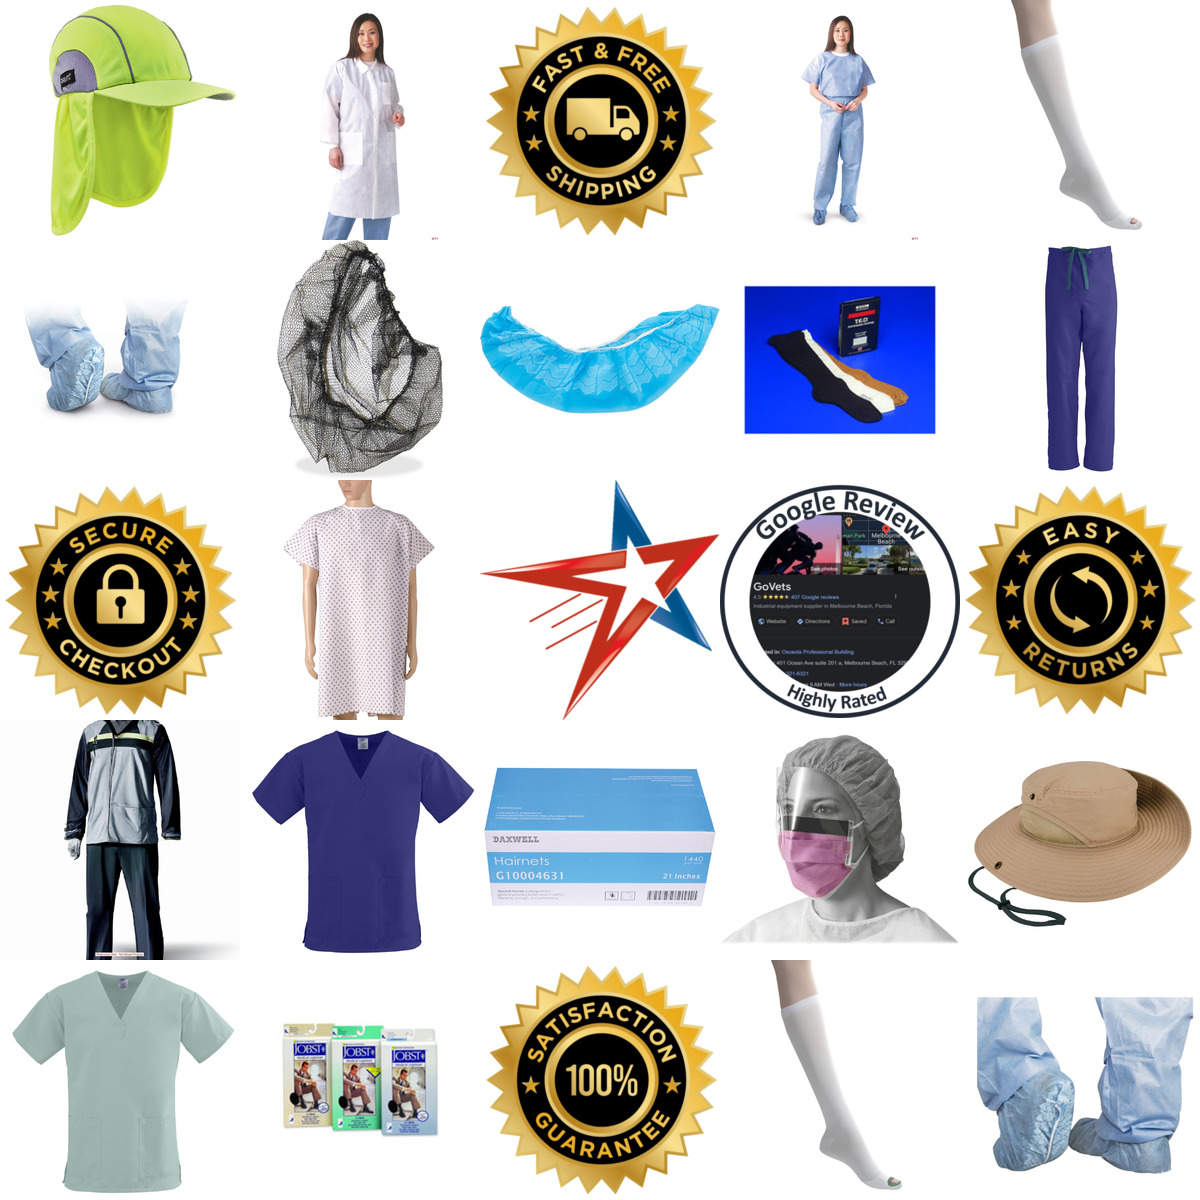 A selection of Medical Wear products on GoVets